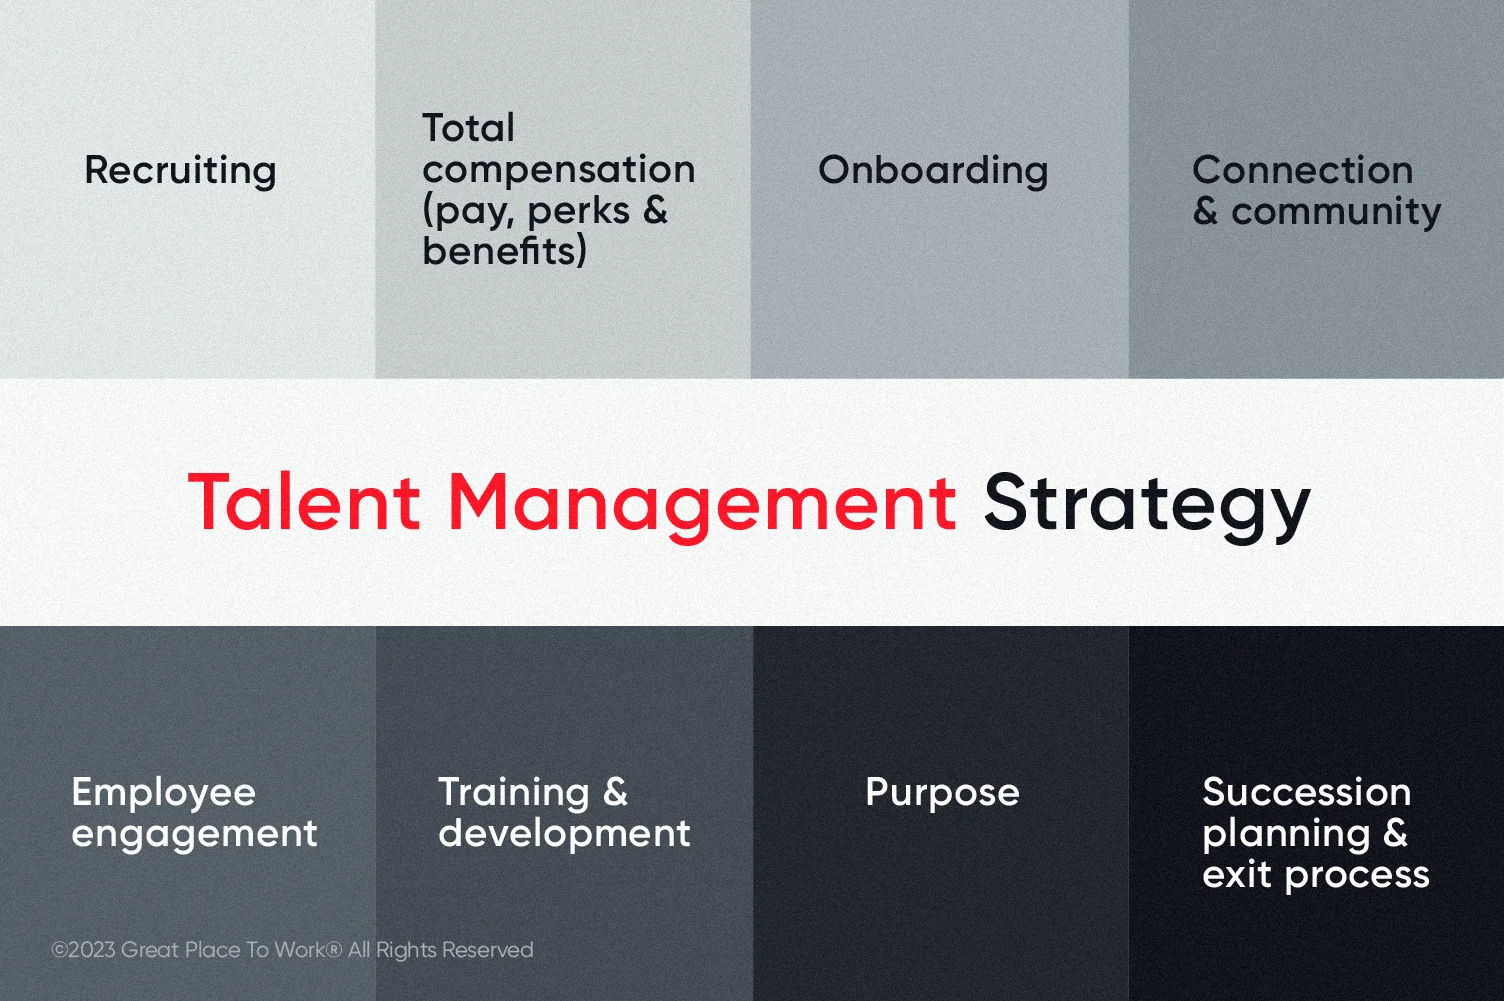 8 Elements of Talent Management Strategy